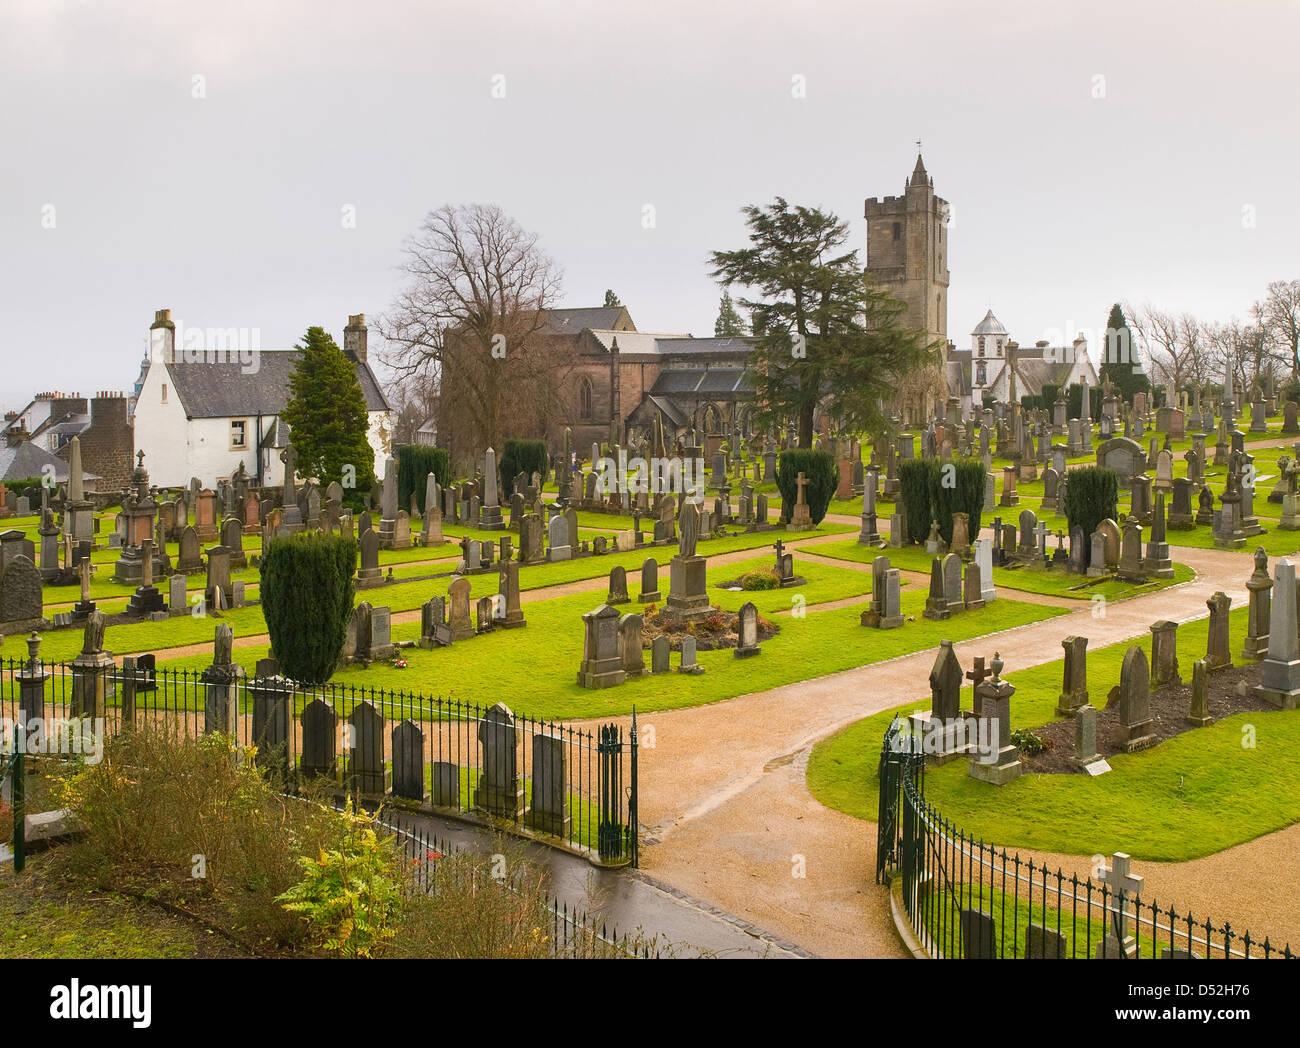 Scottish Cemetery in Stirling (Scotland). The photo is taken from the top of a hill and offers an overview of the place Stock Photo